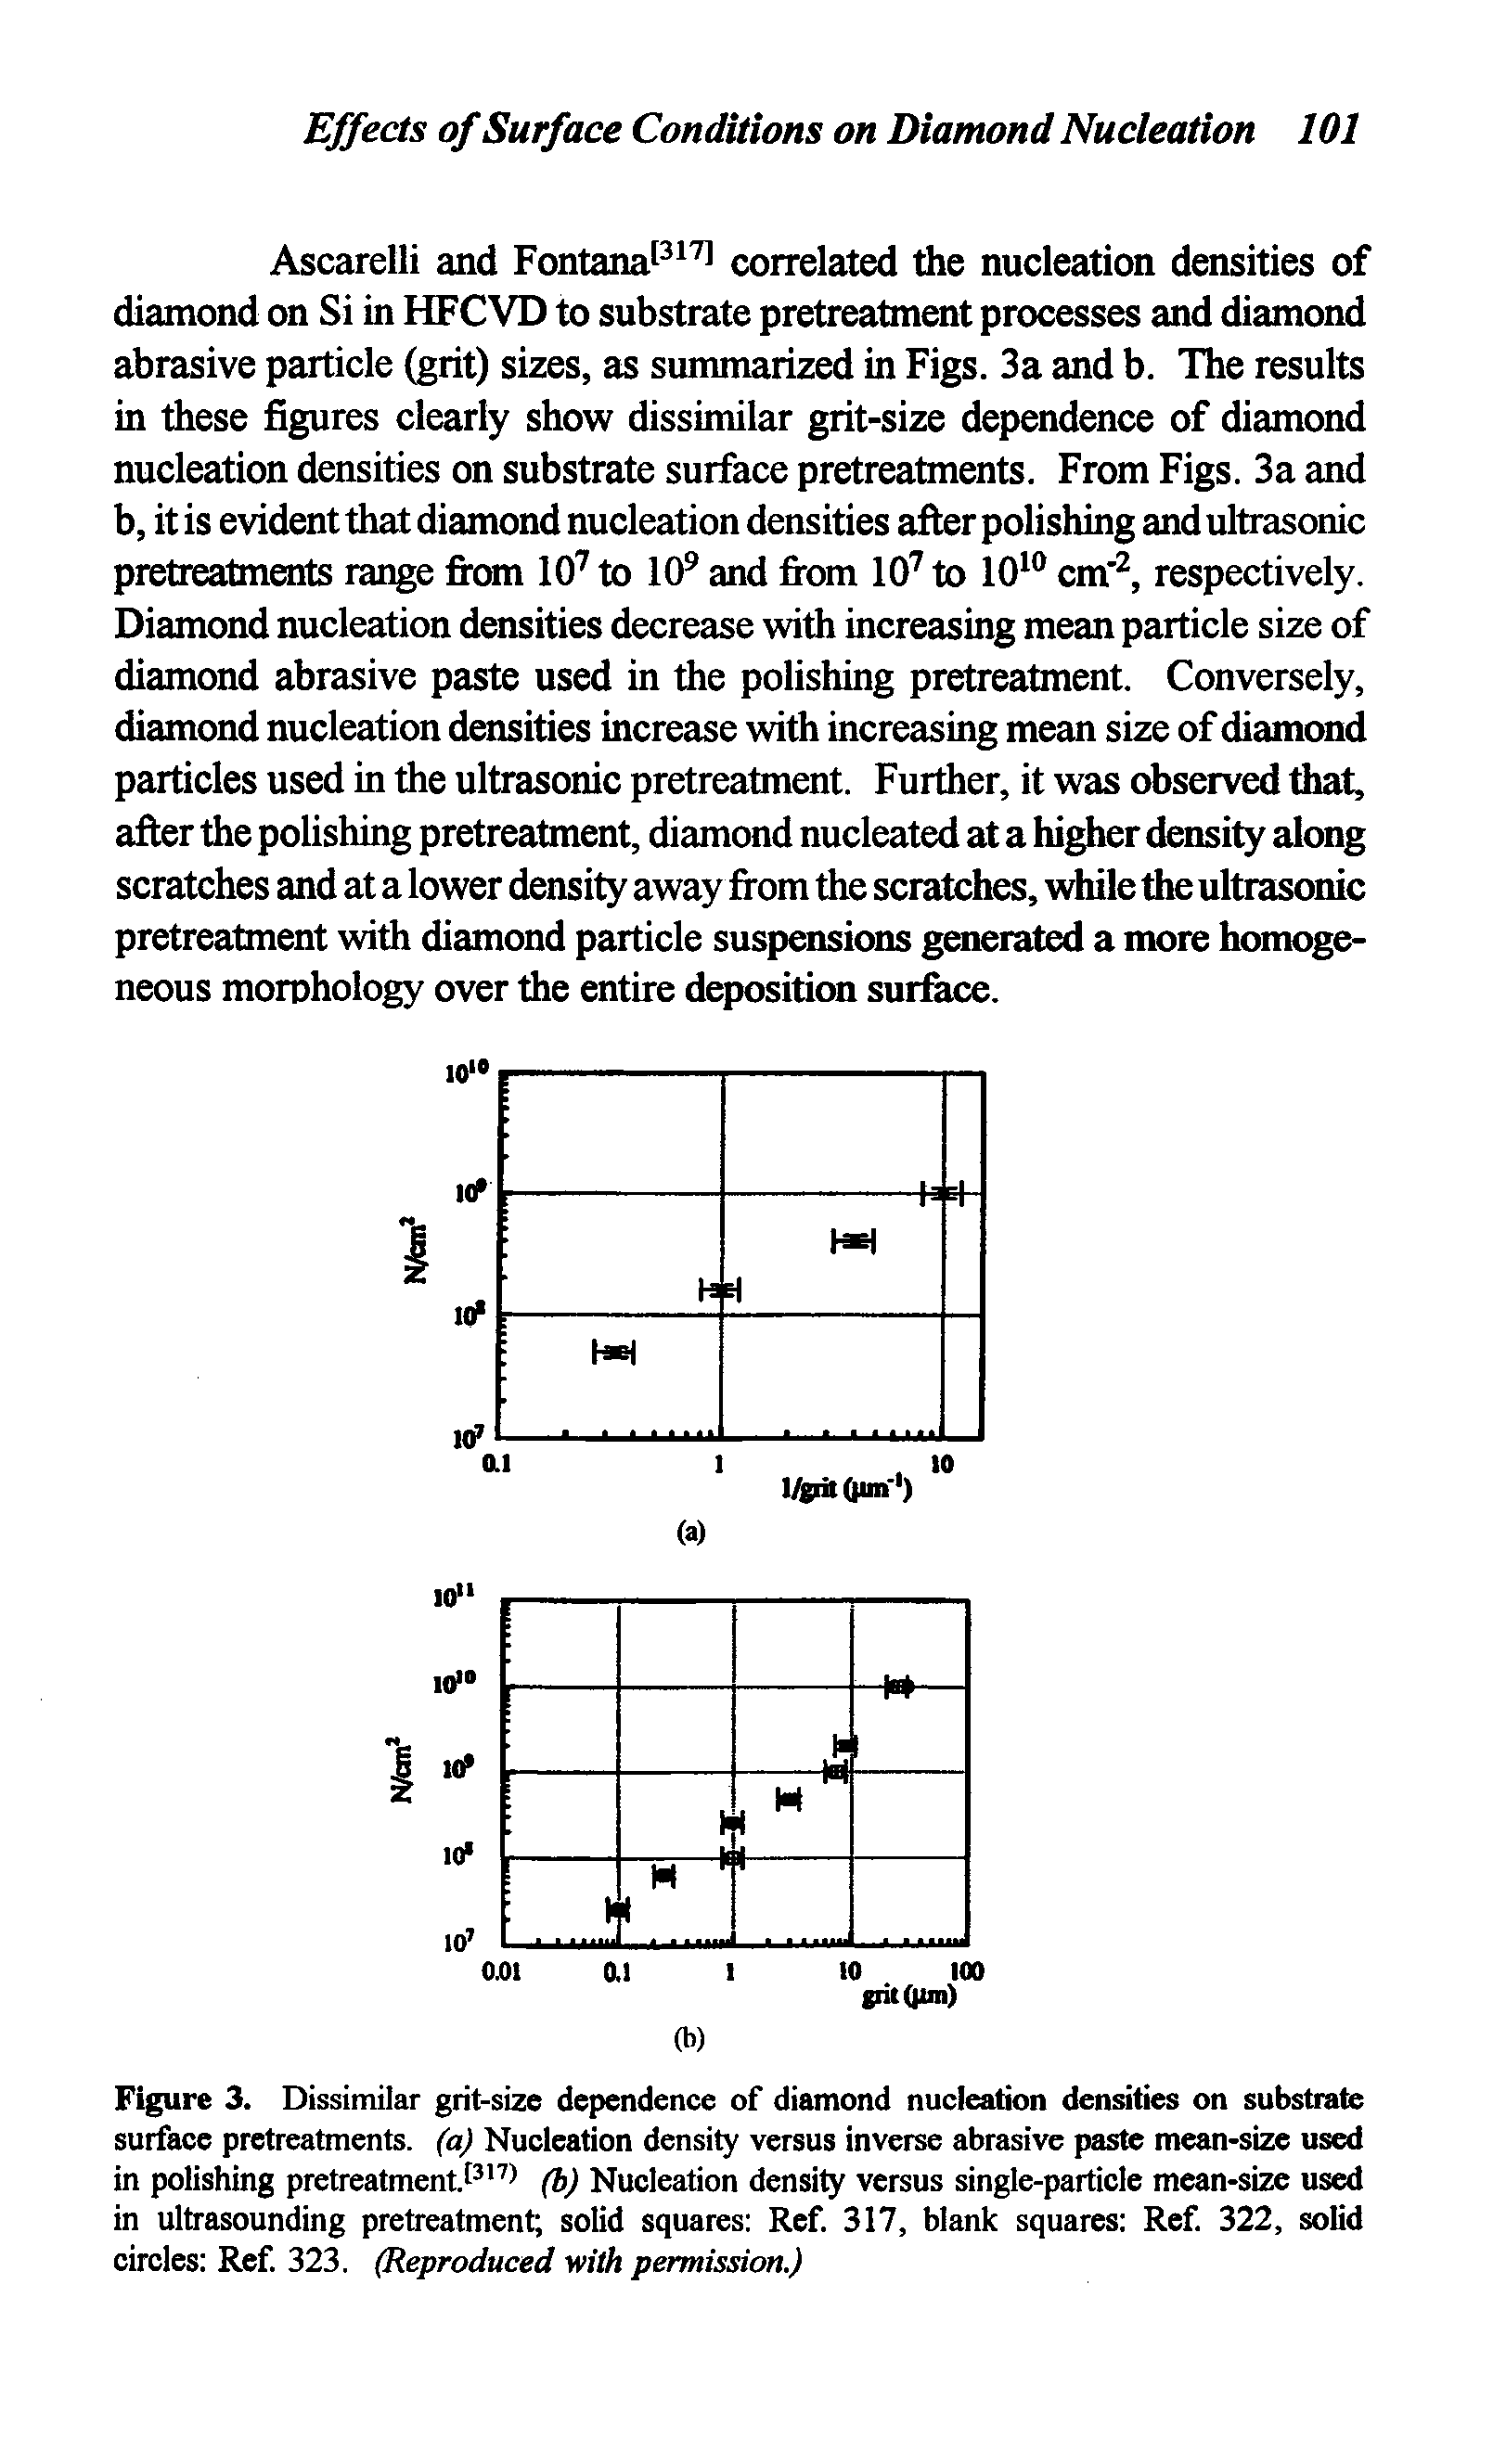 Figure 3. Dissimilar grit-size dependence of diamond nucleation densities on substrate surface pretreatments, (a) Nucleation density versus inverse abrasive paste mean-size used in polishing pretreatment.(b) Nucleation density versus single-particle mean-size used in ultrasounding pretreatment solid squares Ref. 317, blank squares Ref. 322, solid circles Ref. 323. (Reproduced with permission.)...